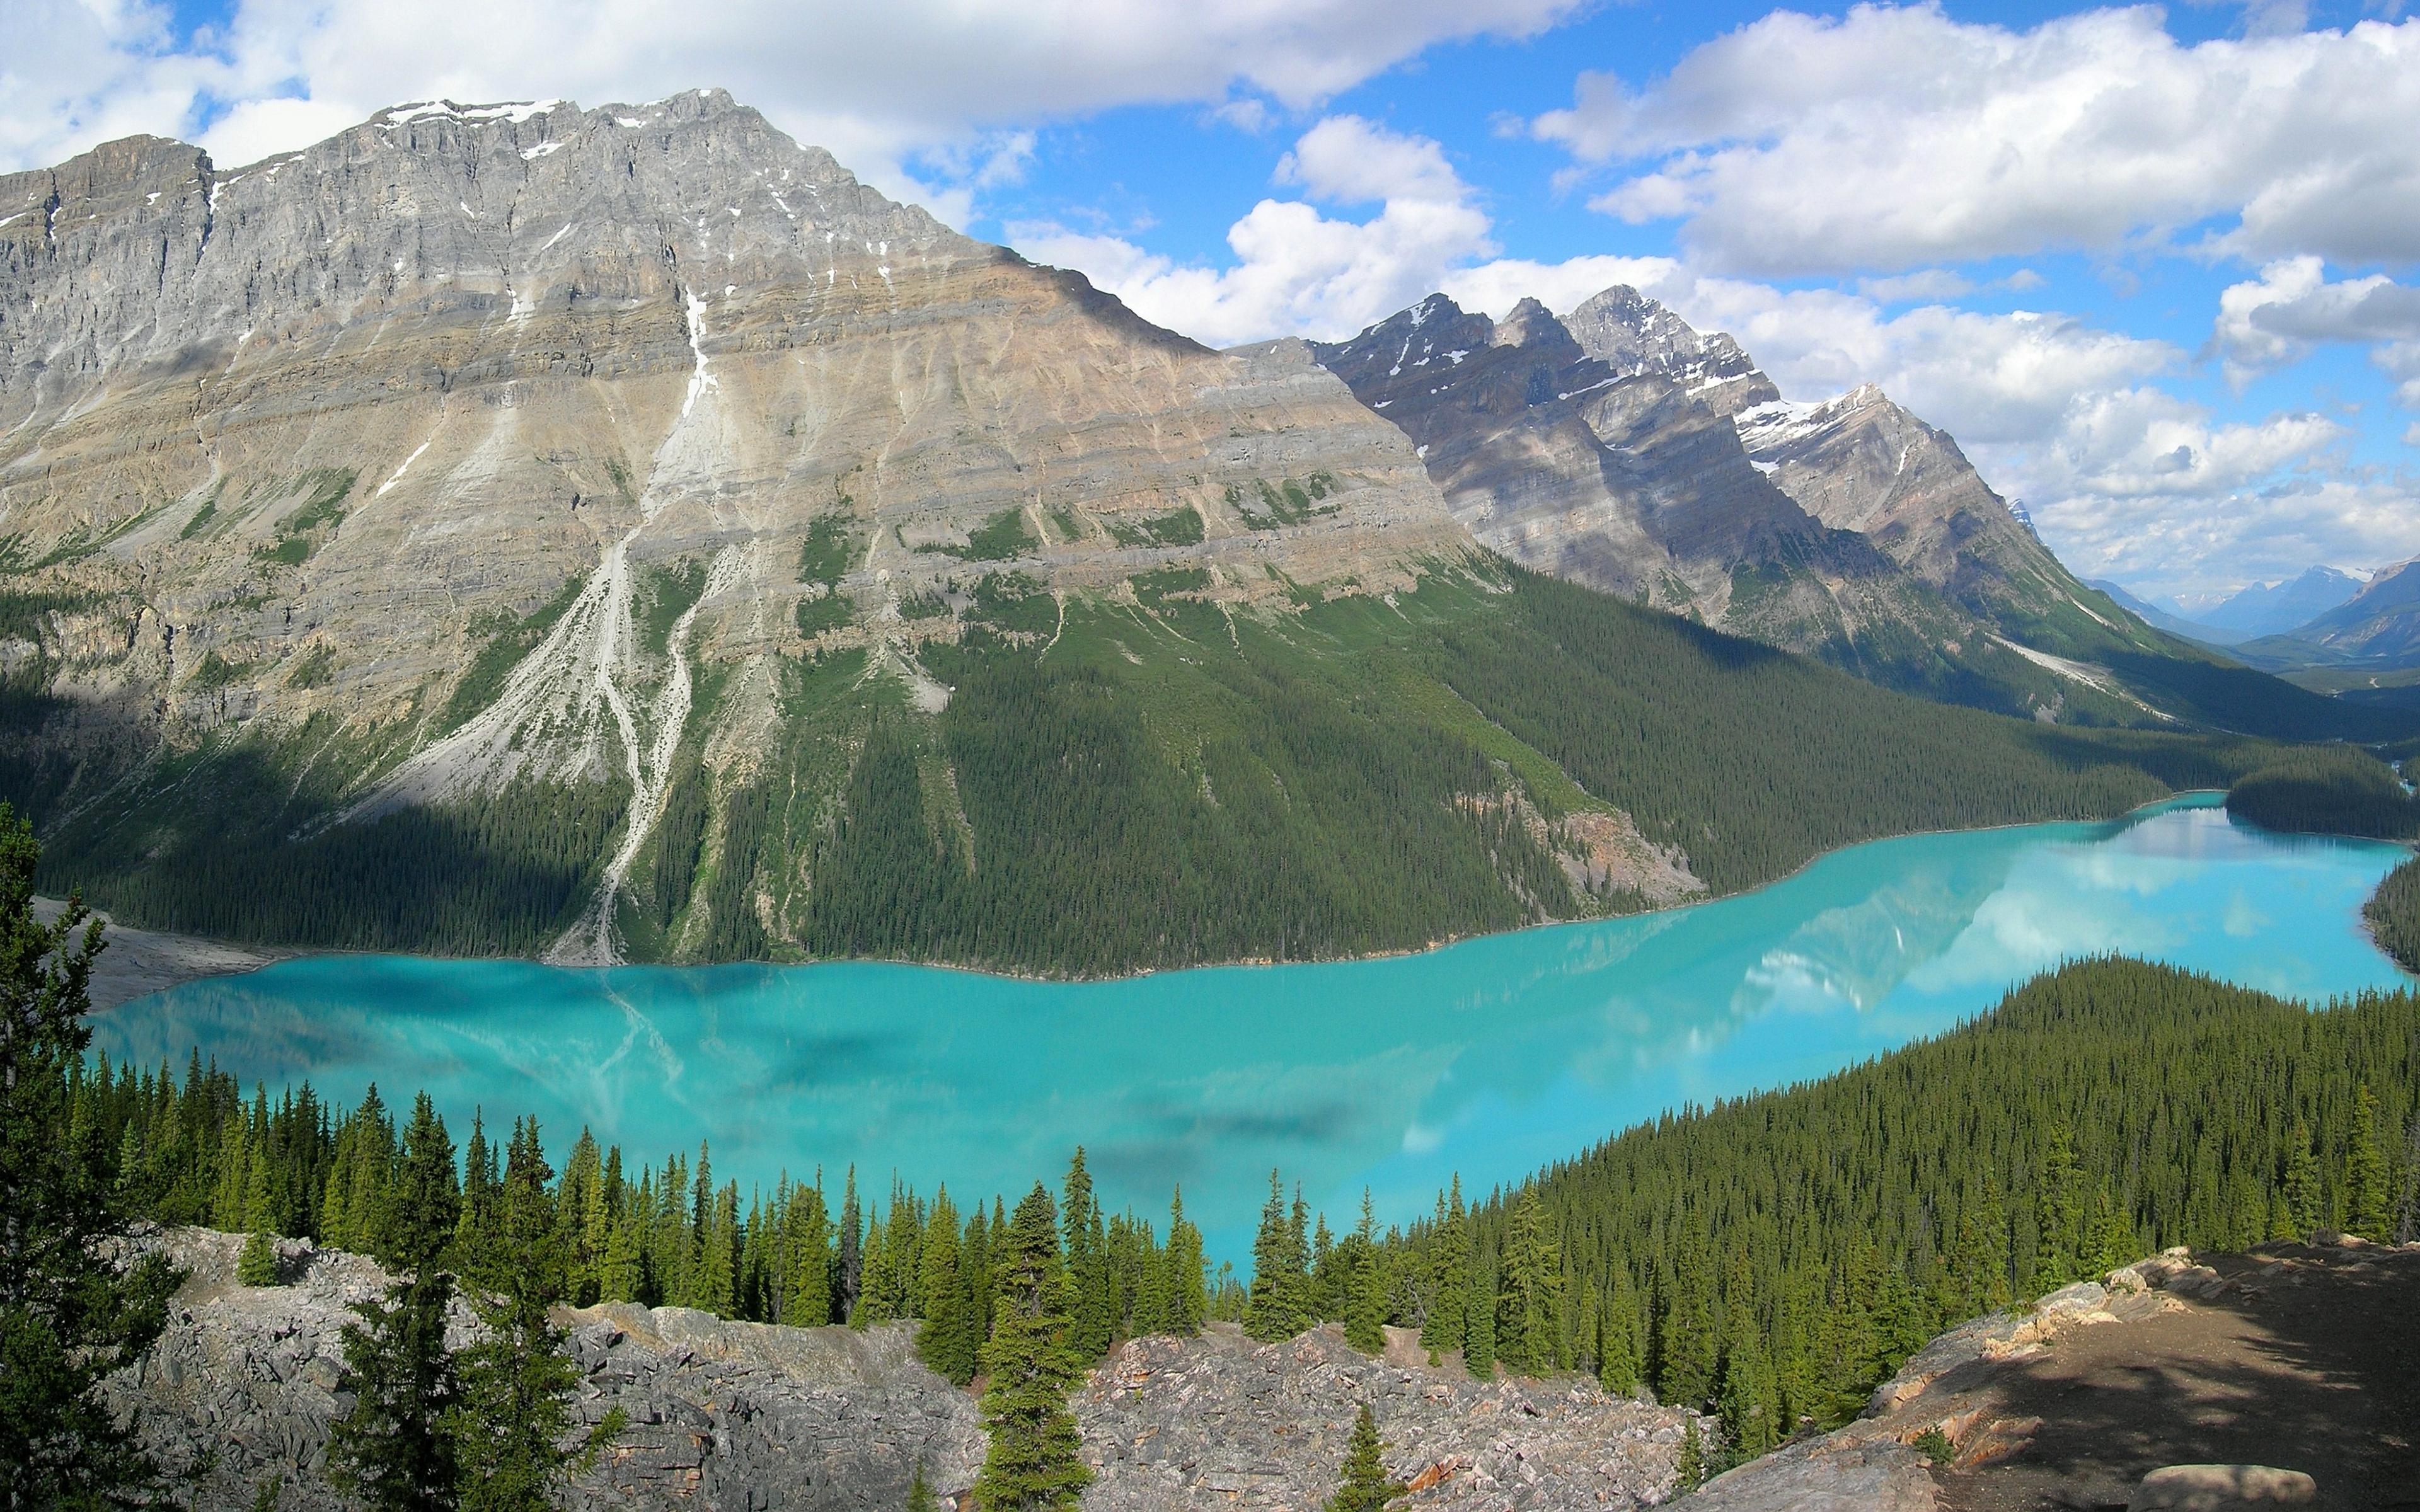 Peyto Lake, A Glacier Fed Lake Located In Banff National Park In The